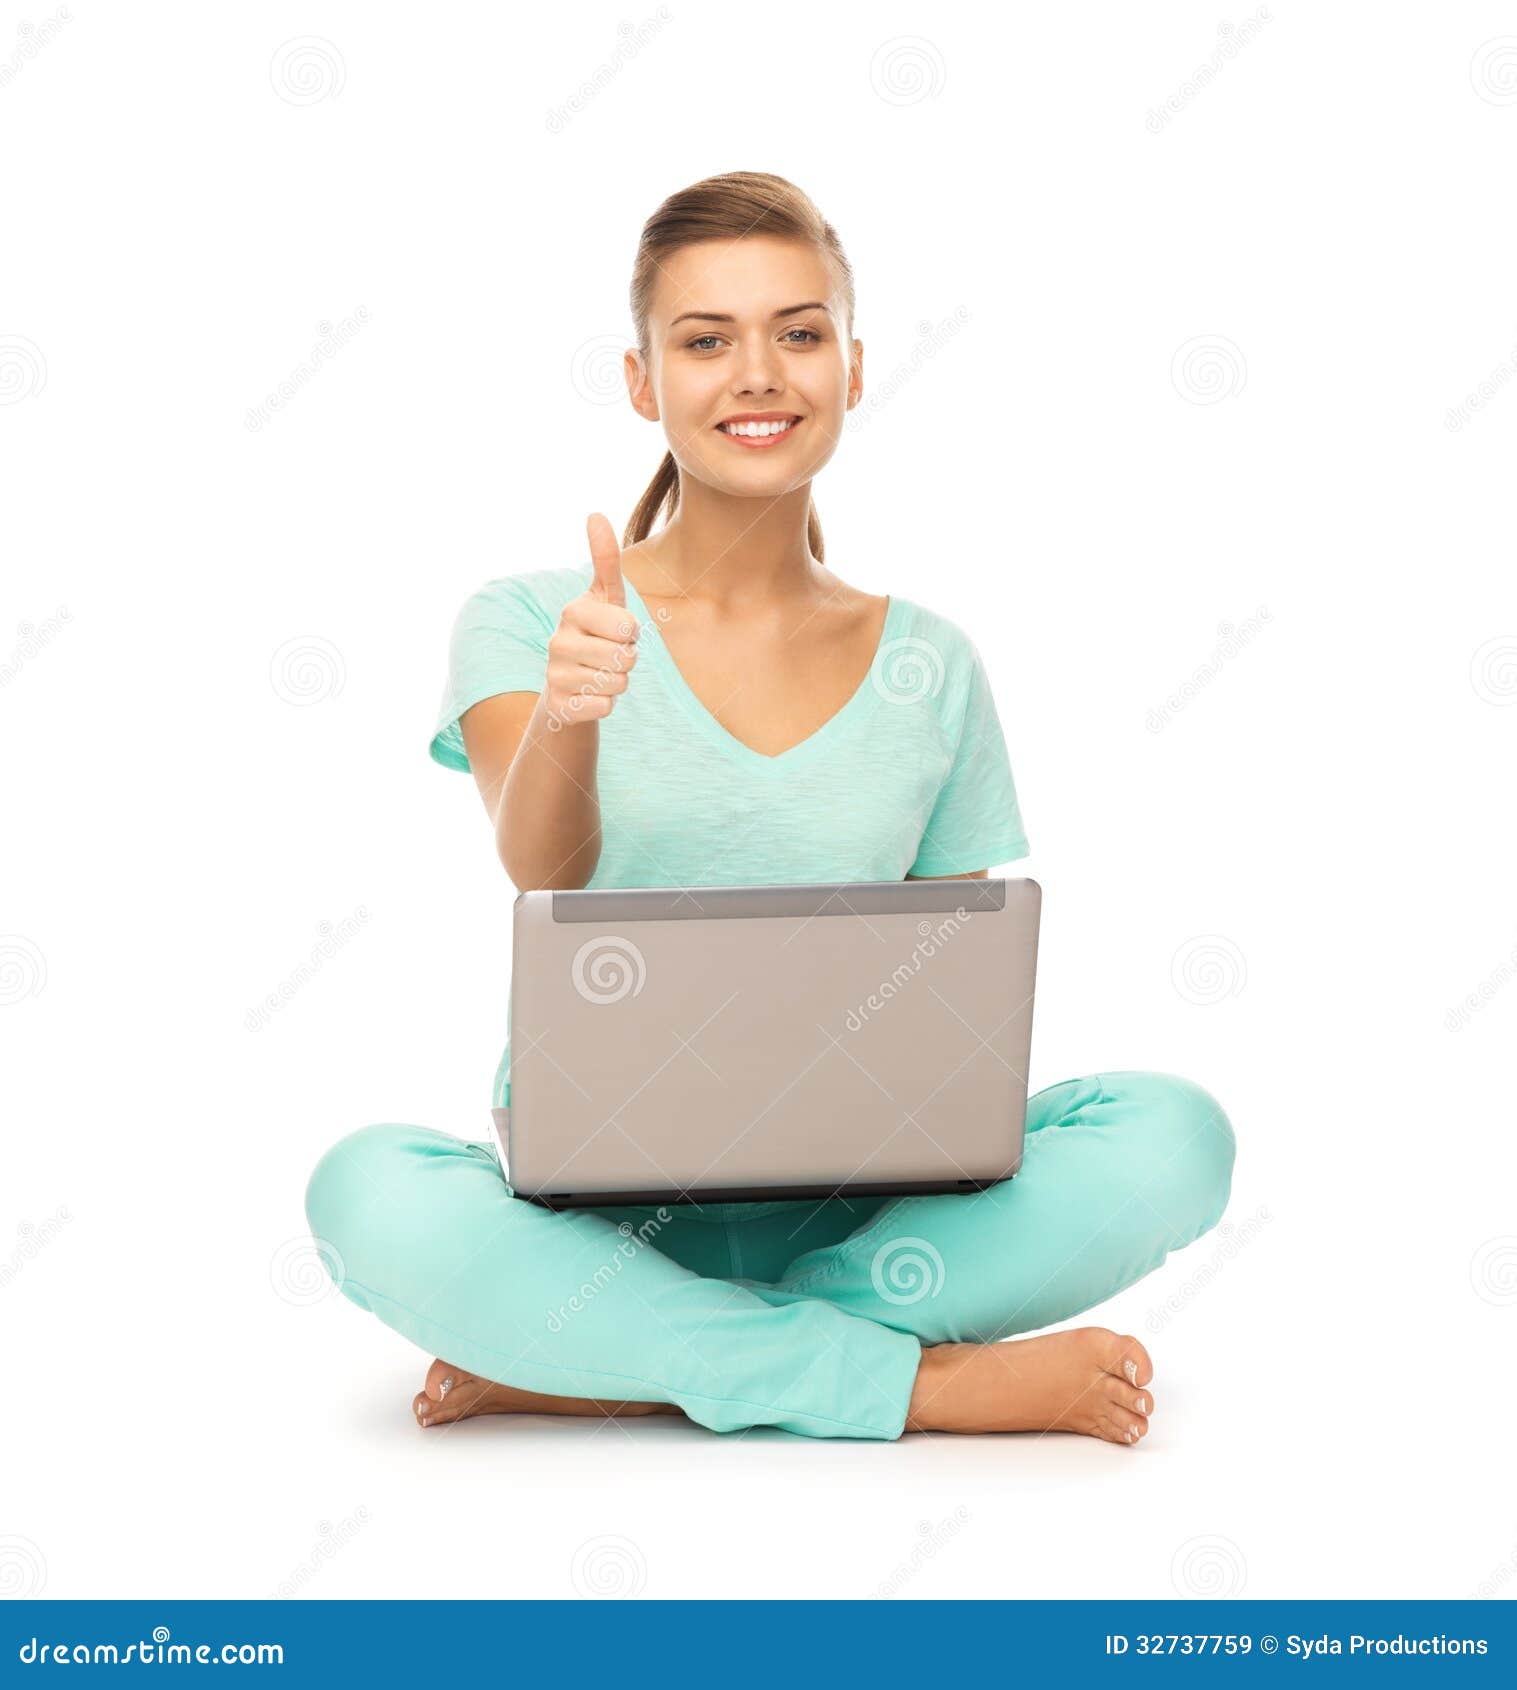 Girl with laptop showing thumbs up. Young girl sitting on the floor with laptop showing thumbs up